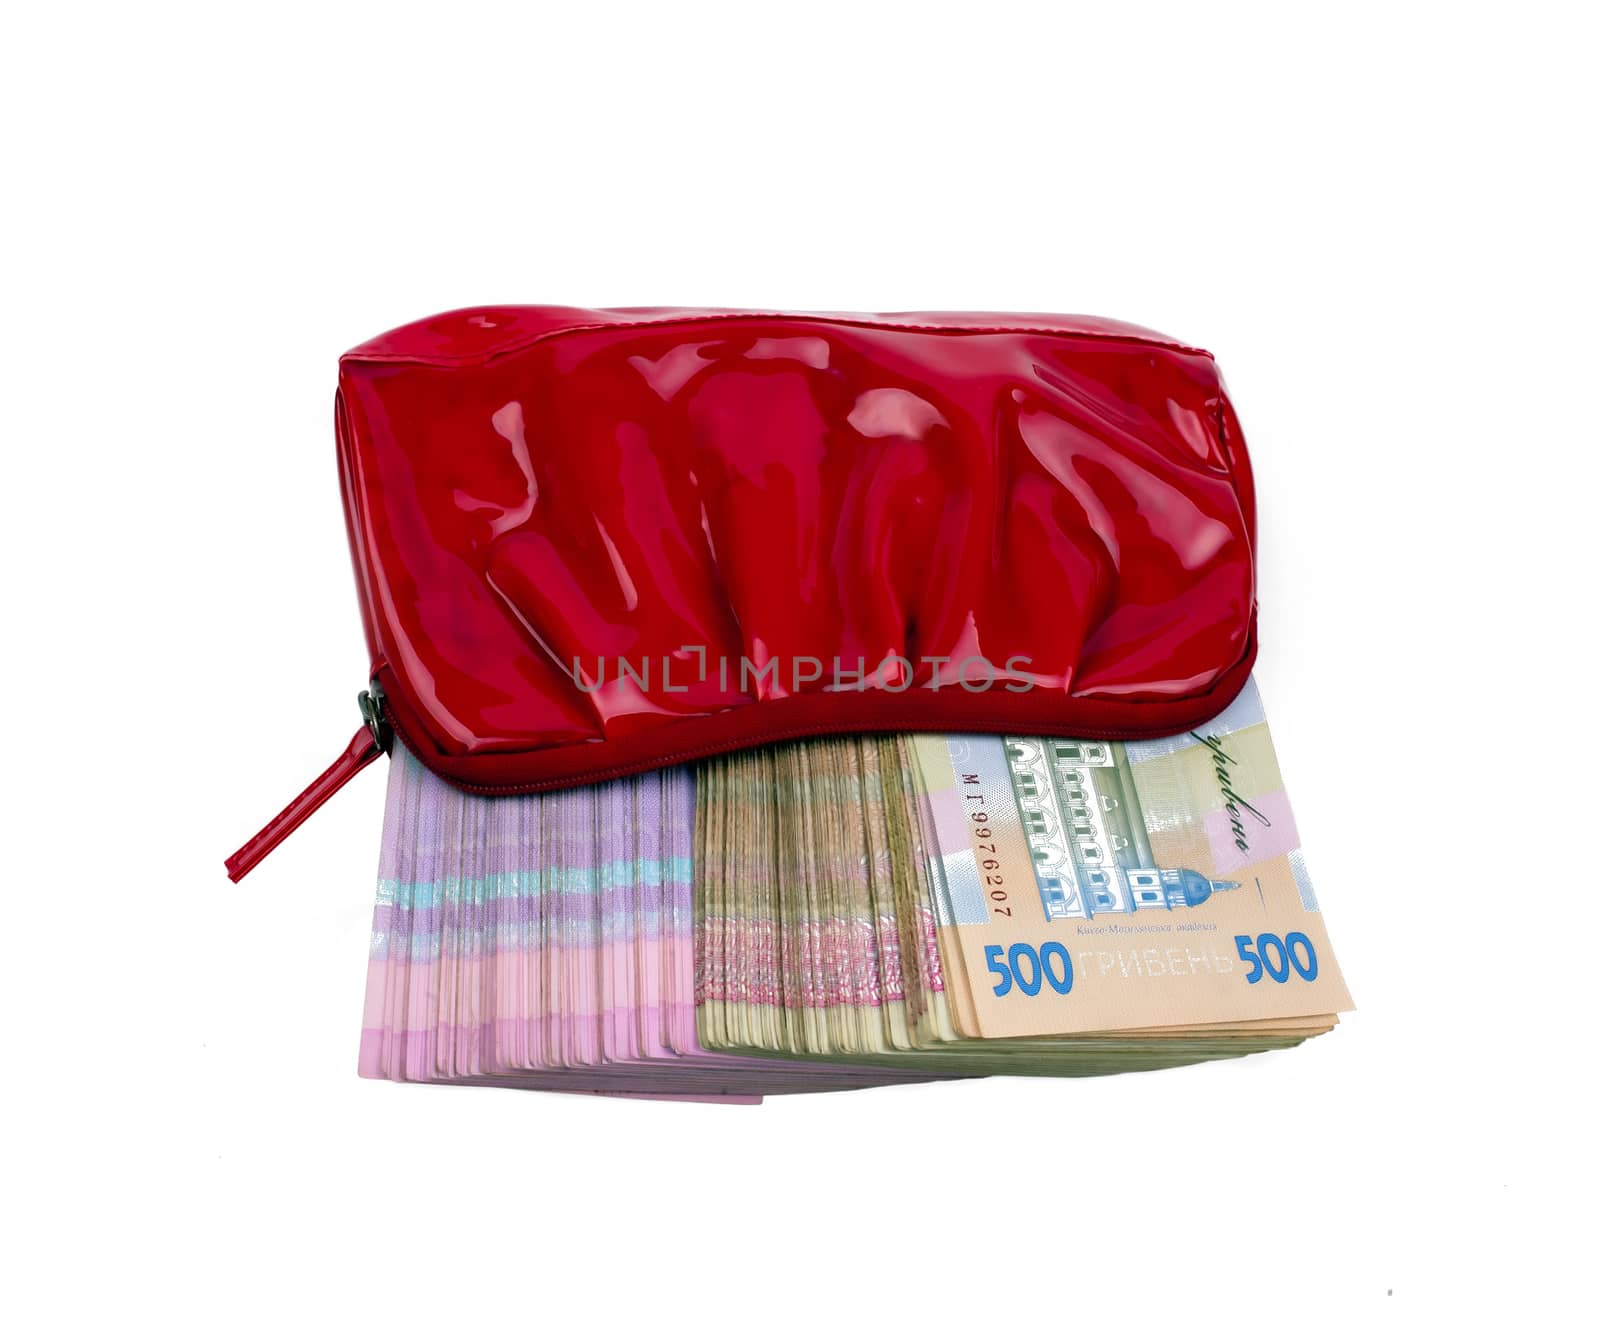 Ukrainian paper notes in red women's purse on a white background